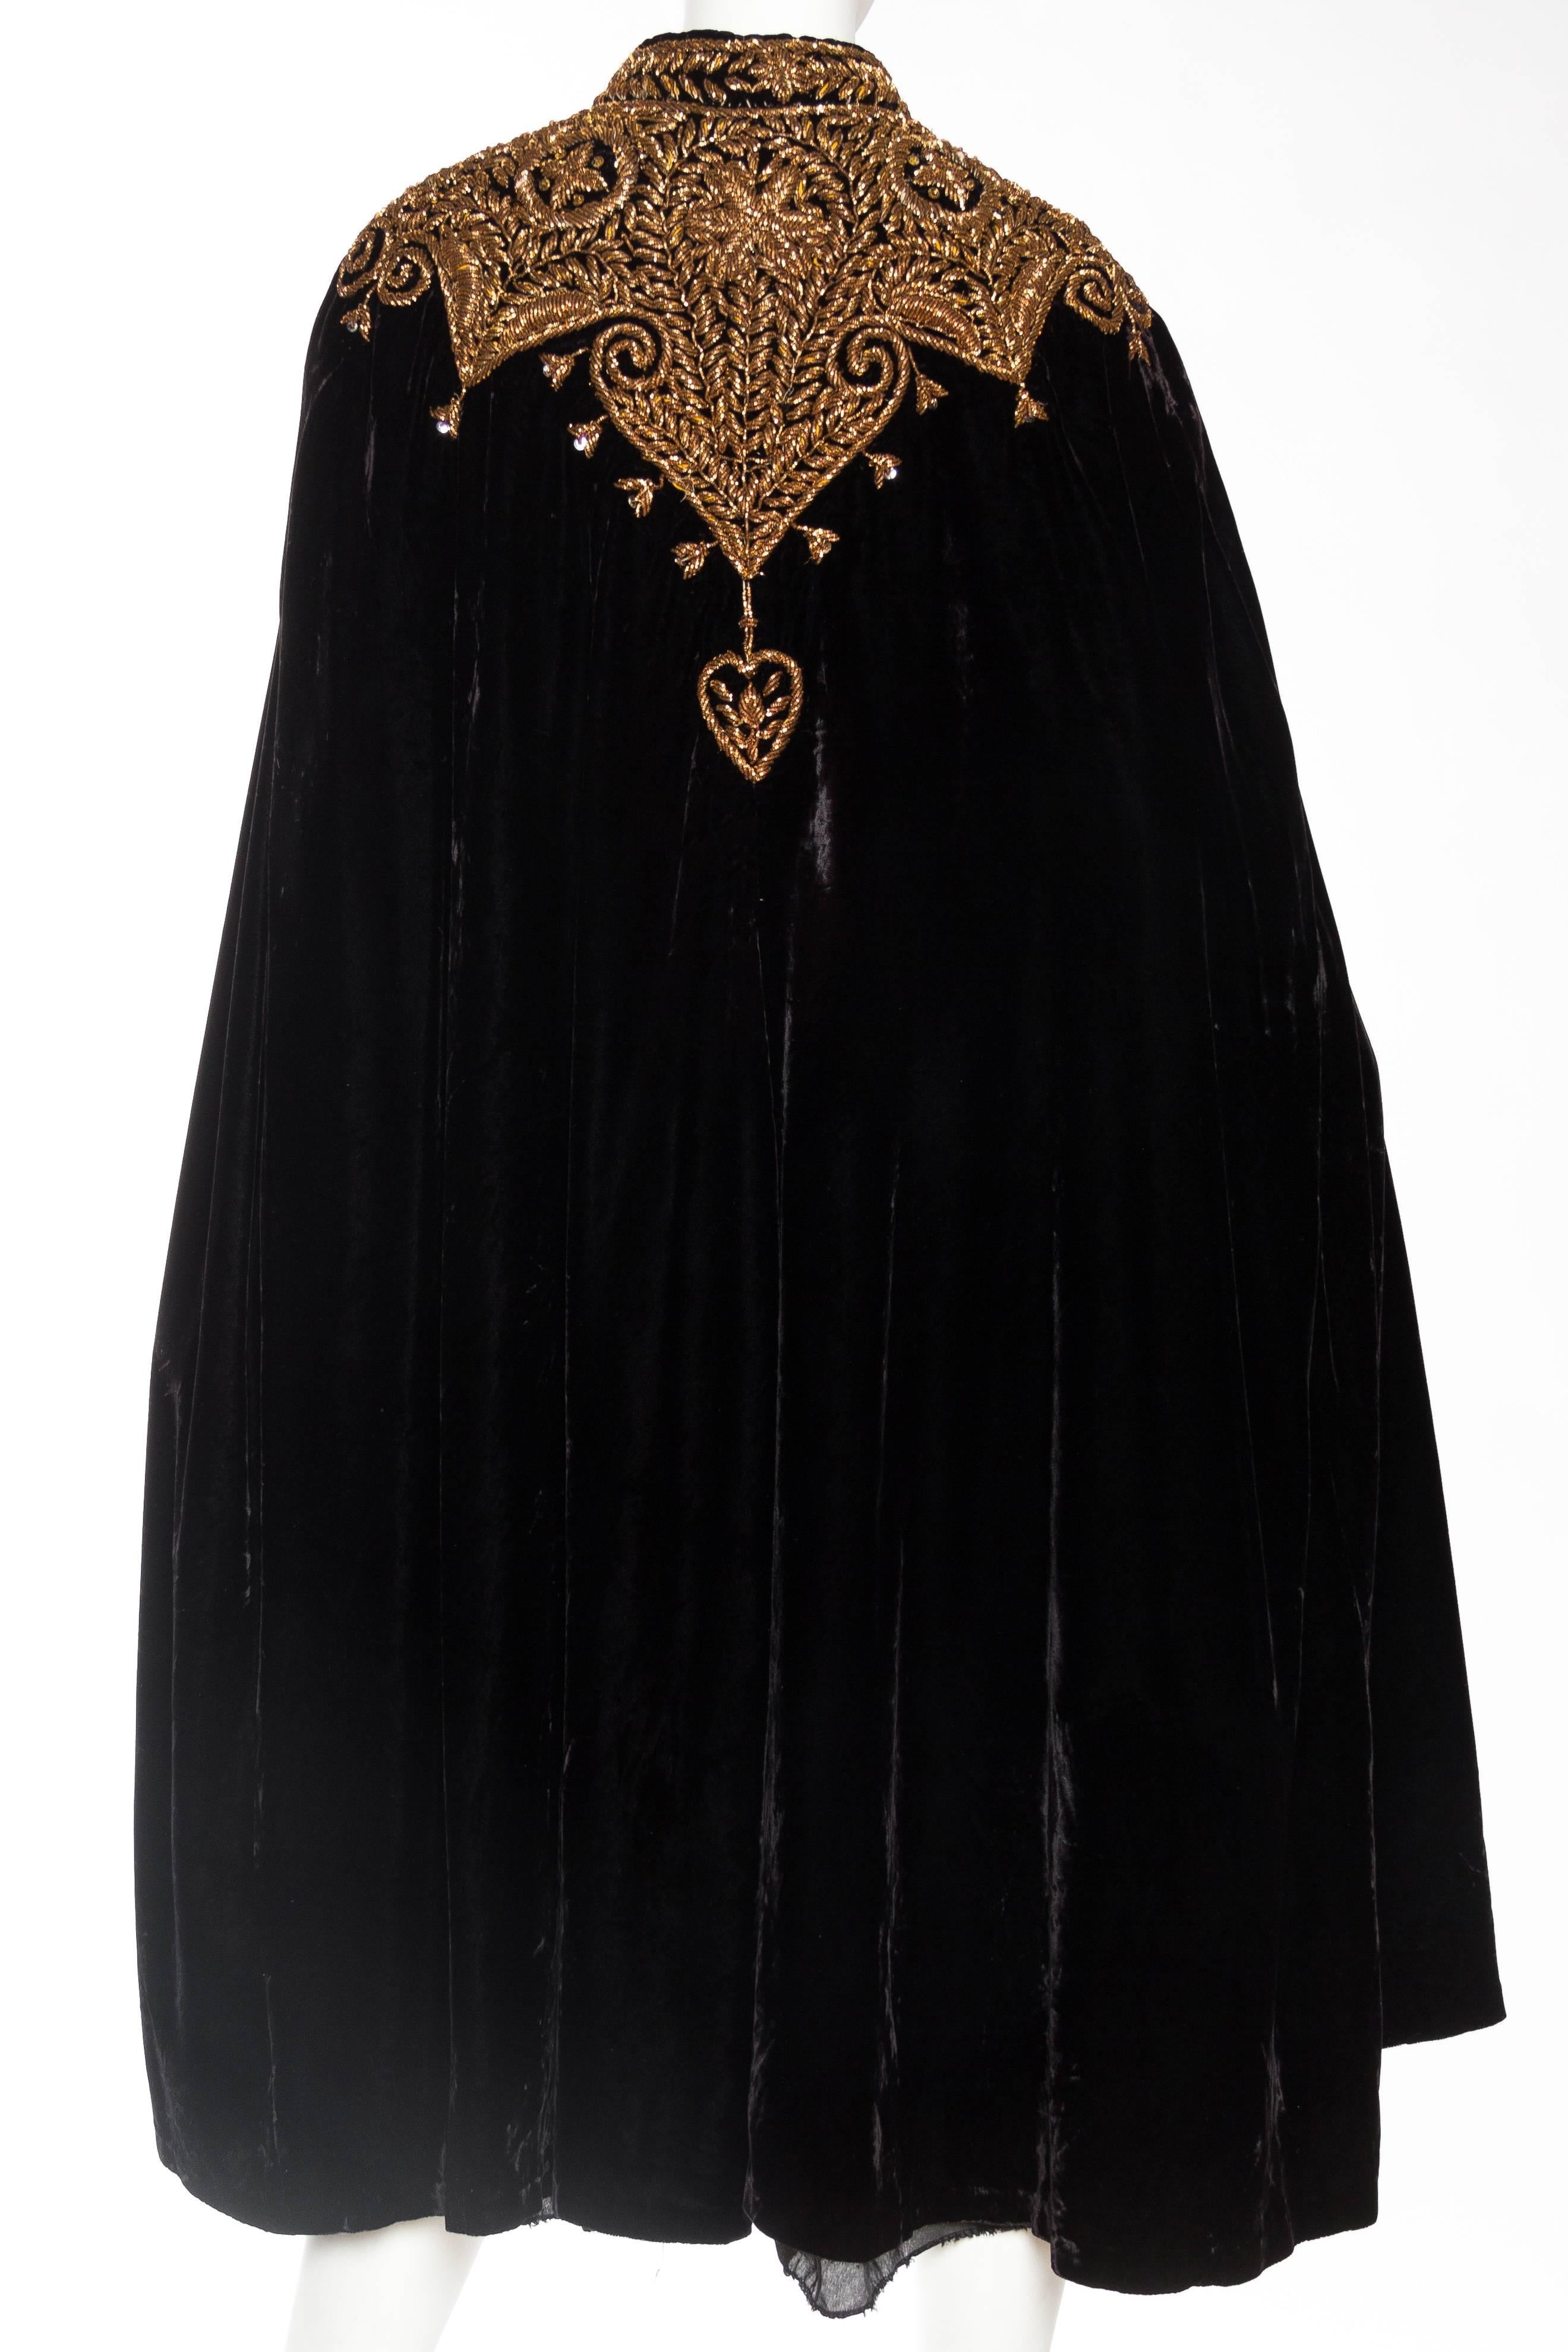 1970S Black Rayon Velvet Cape With Dramatic Real Copper Hand Embroidery 2